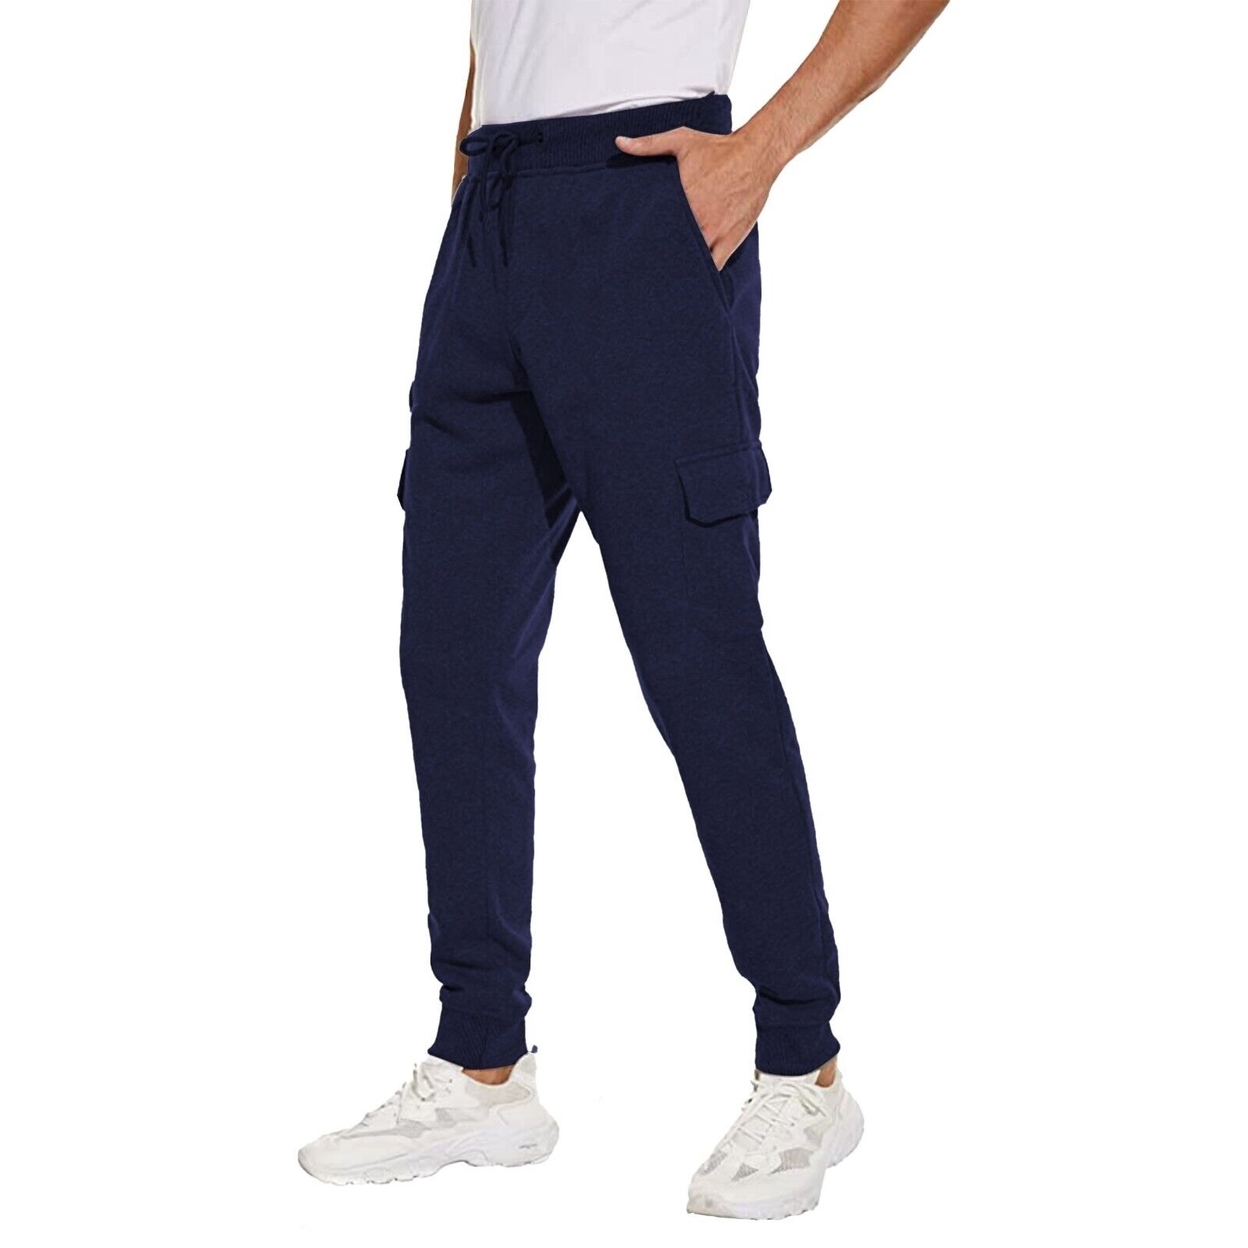 Men's Ultra Soft Winter Warm Thick Sweat Pant Athletic Sherpa Lined Jogger Pants - Navy, 3xl